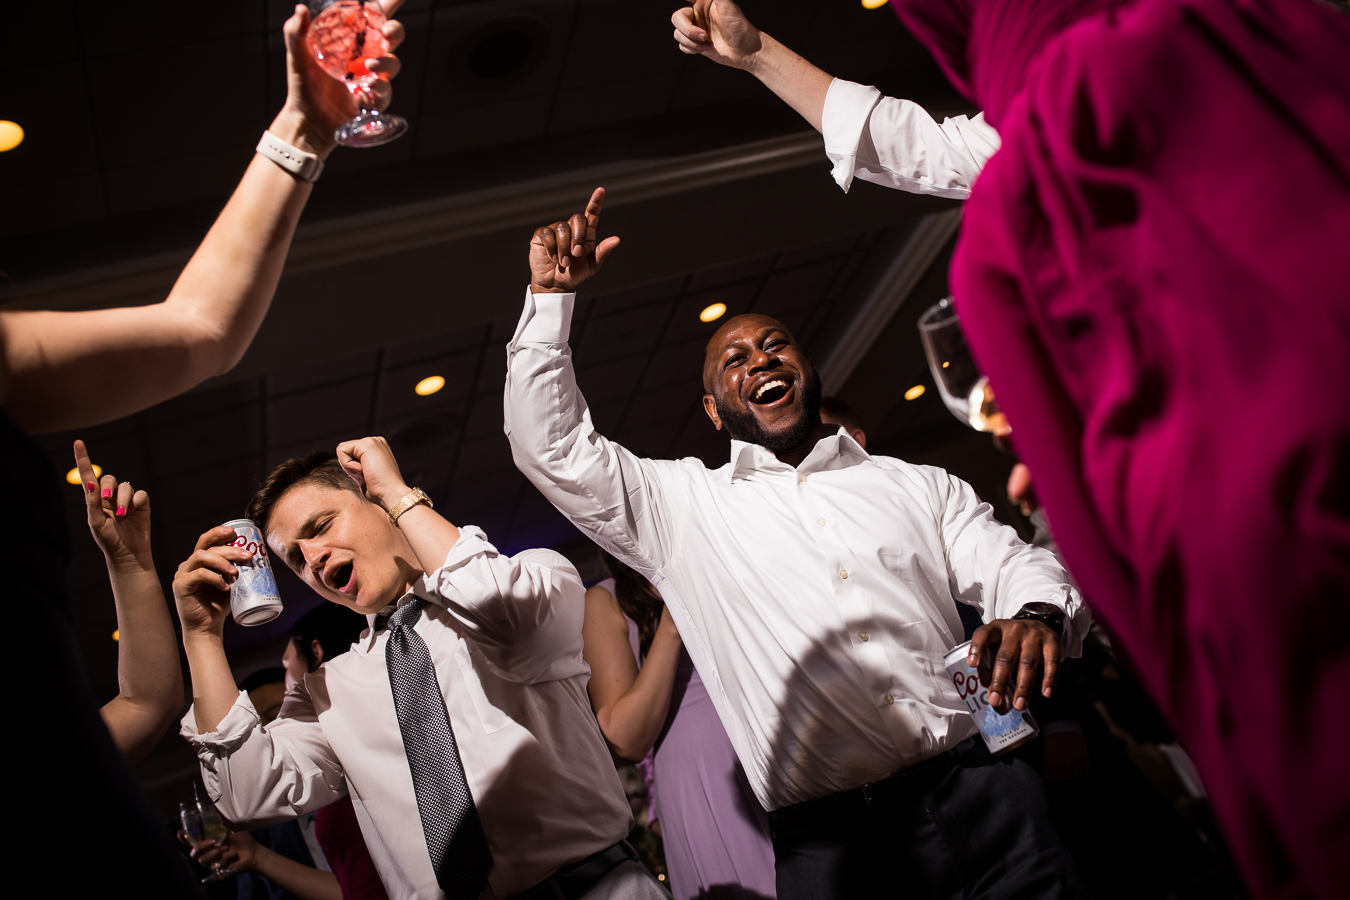 creative wedding photographer, rhinehart photography, captures this unique perspective of guests dancing with their hands in the air during this wedding reception in york 